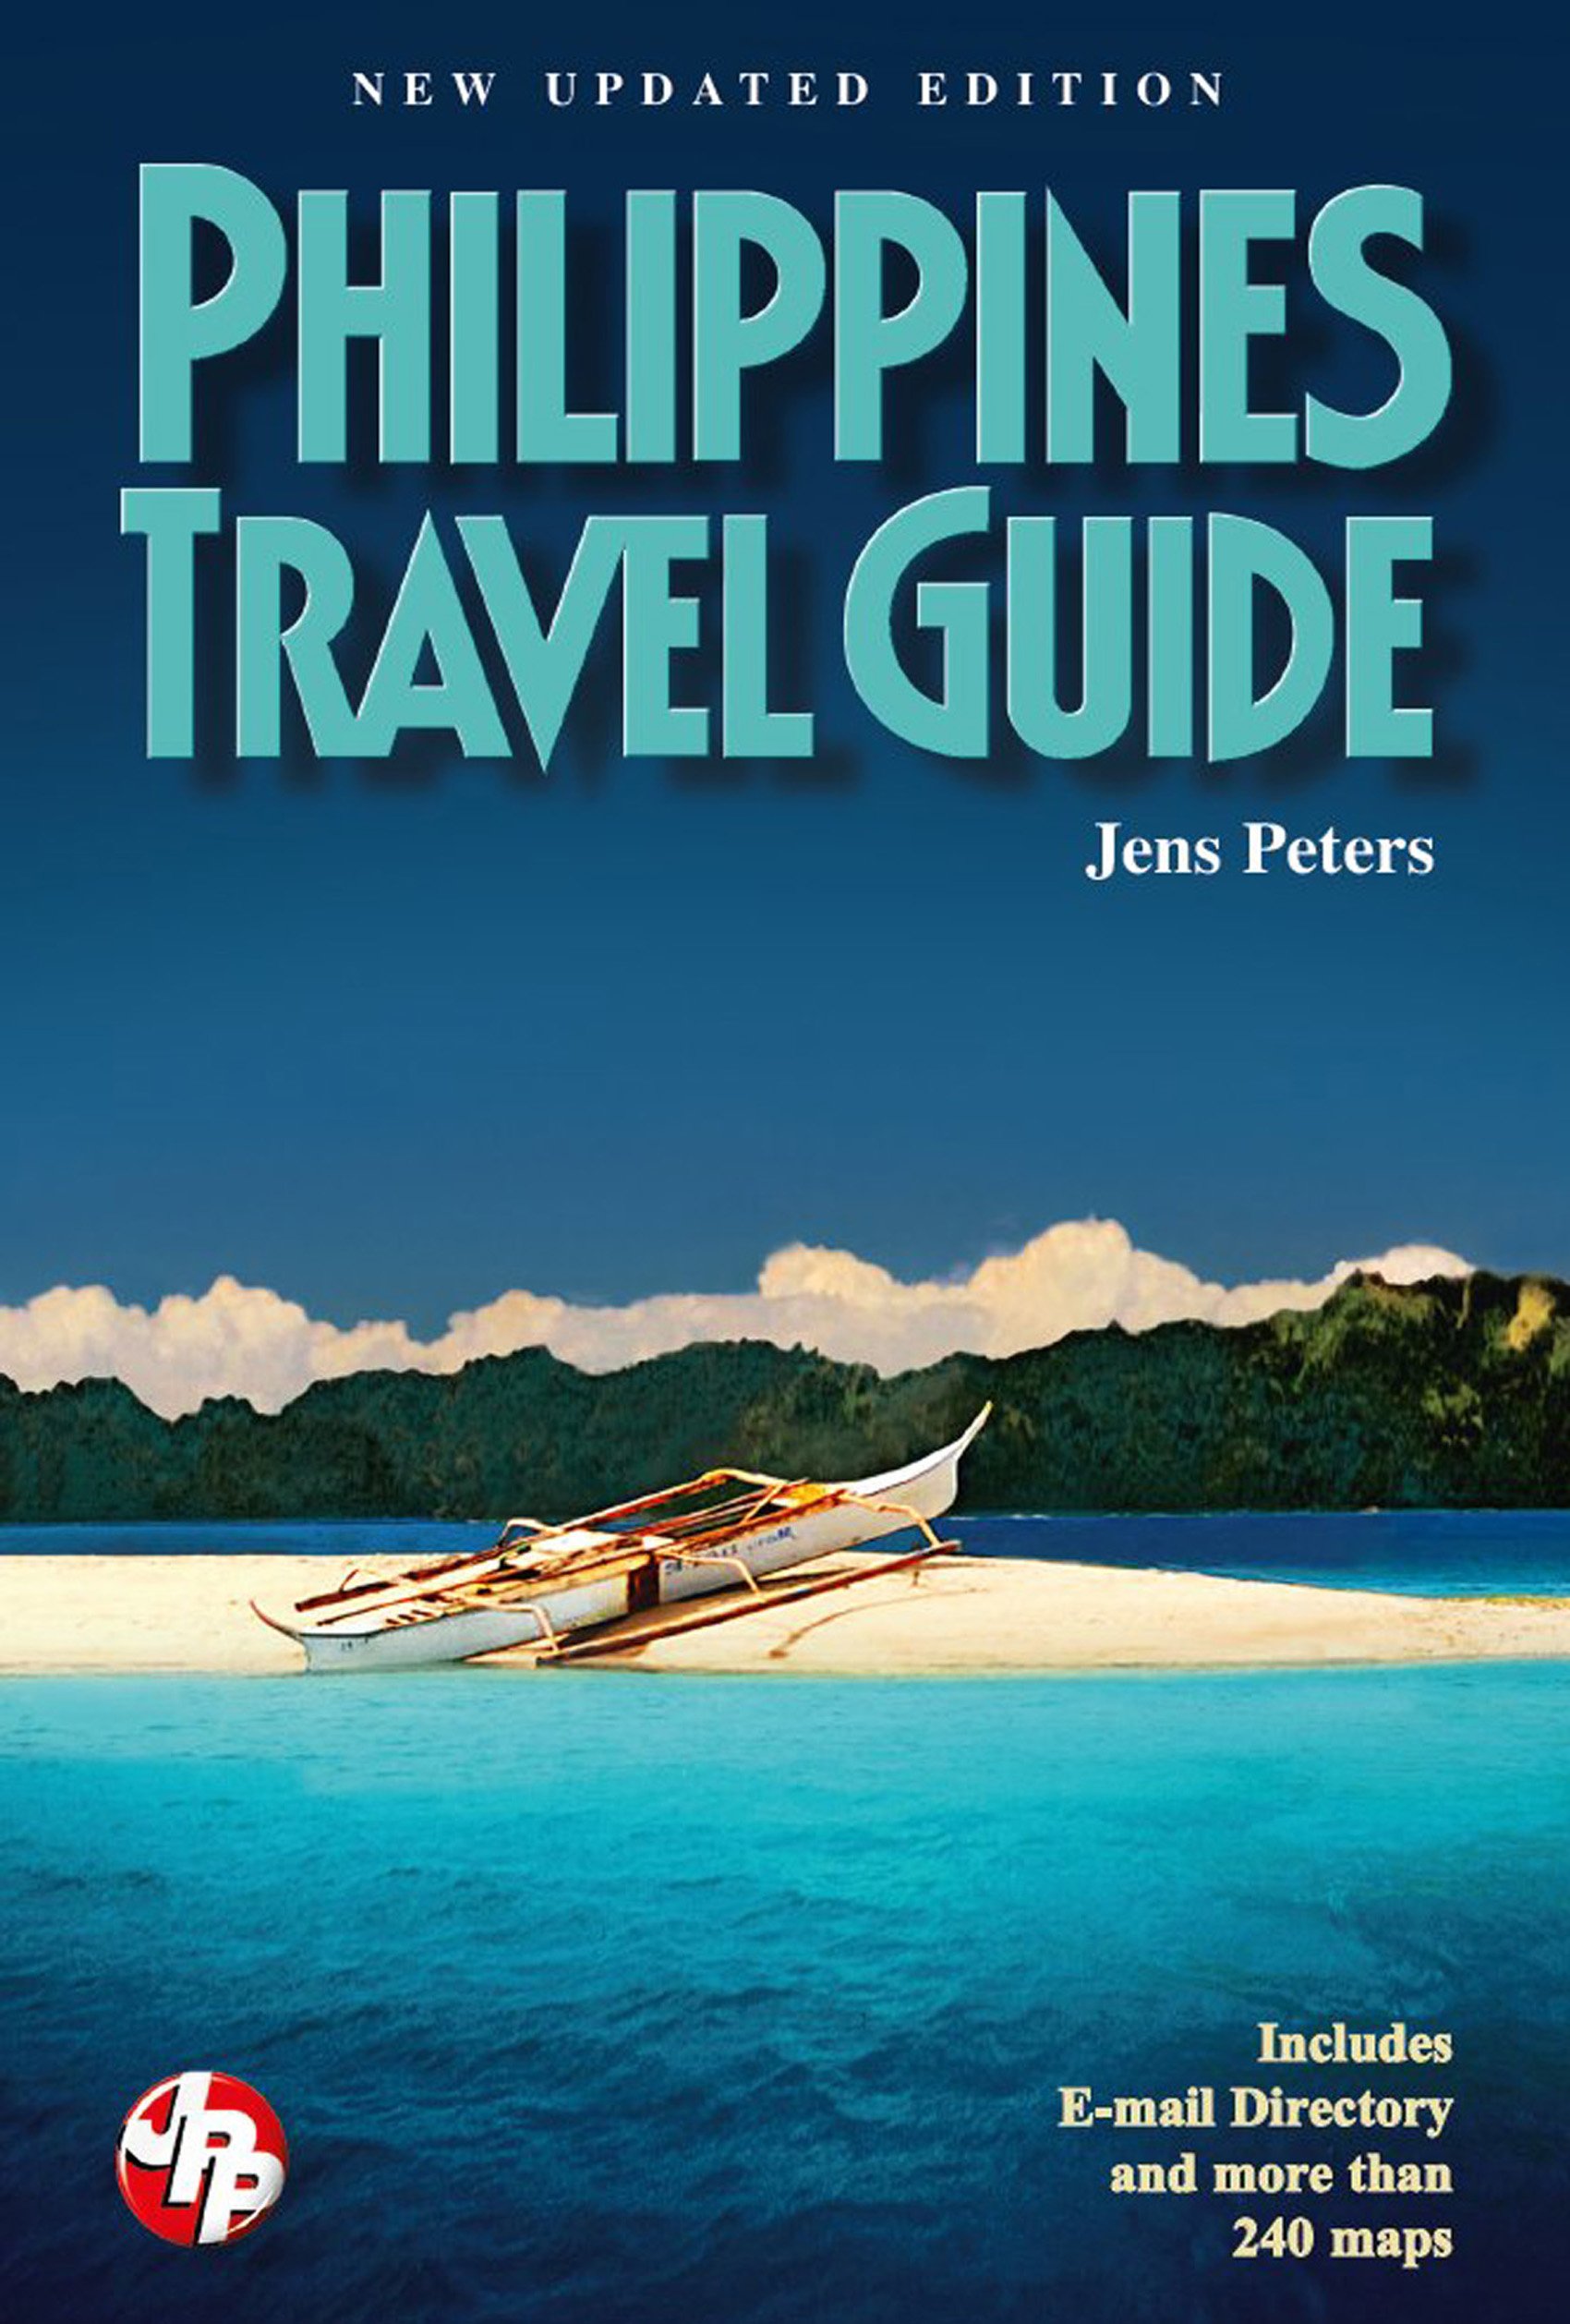 book tours in philippines